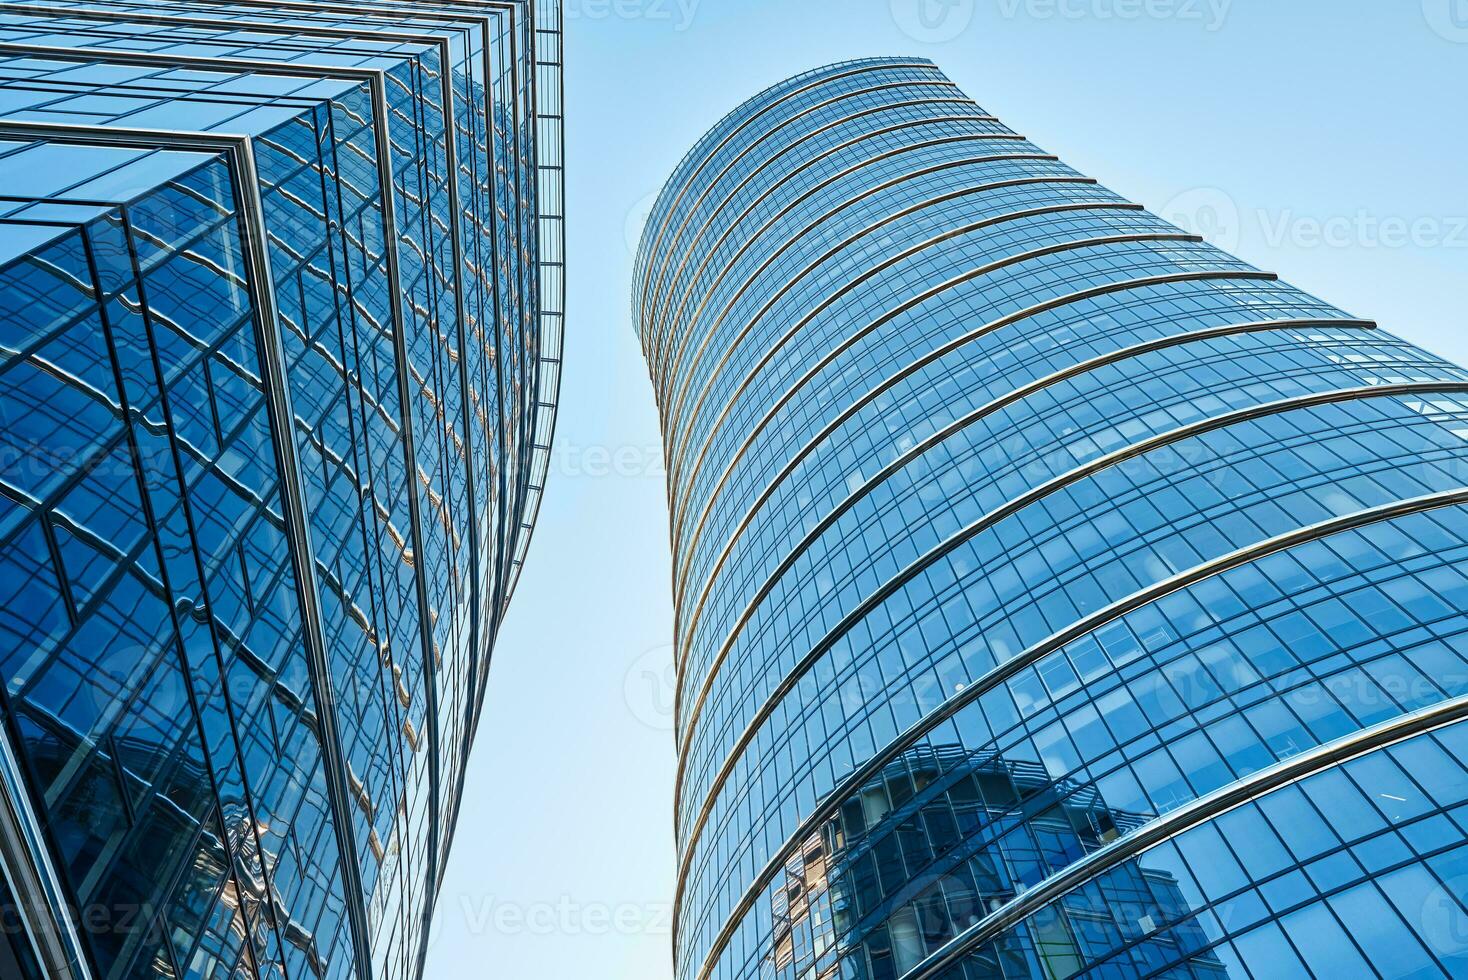 Glass facade of high rise building with geometric lines. Modern architecture photo